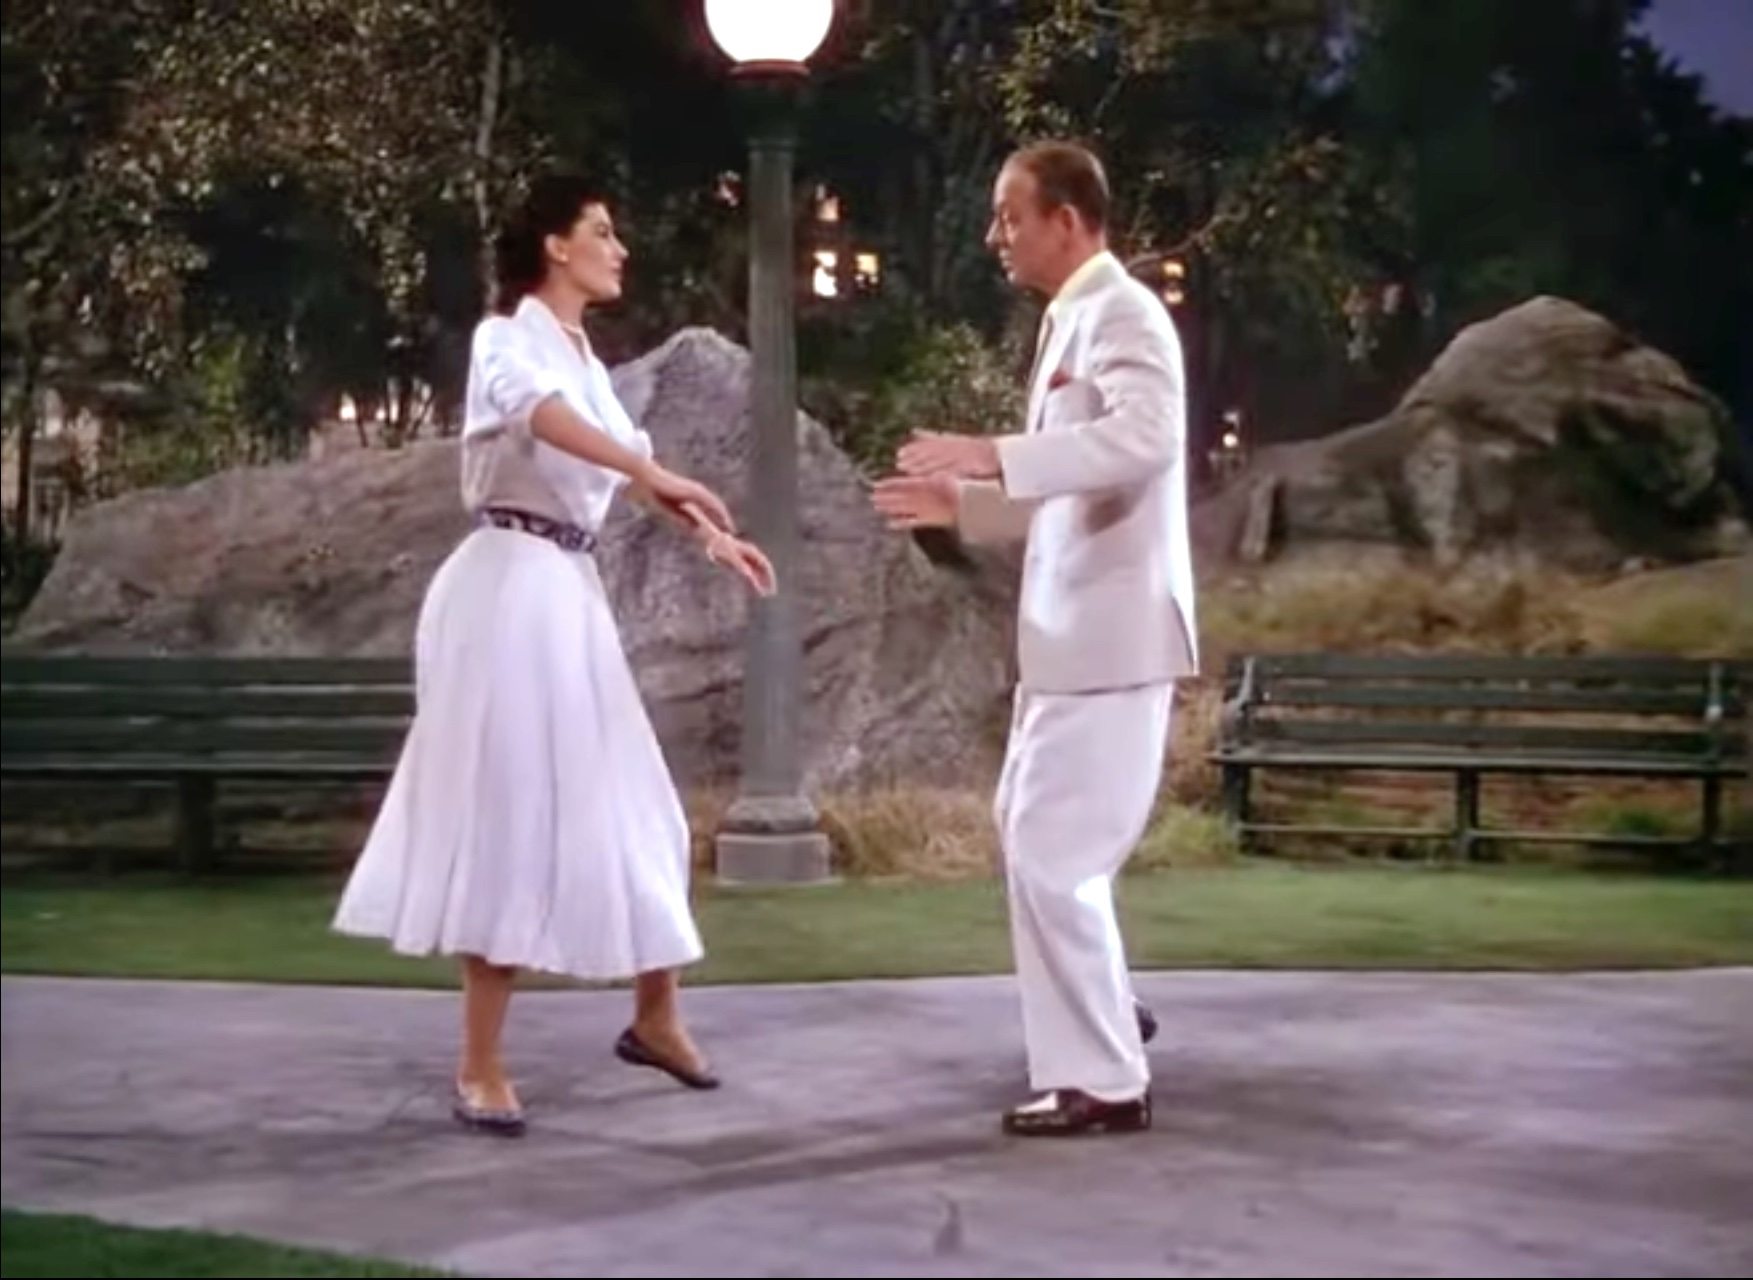 Song lyrics to Dancing in the Dark (1931), danced by Fred Astaire and Cyd Charisse in The Band Wagon, music by Arthur Schwartz and lyrics by Howard Dietz